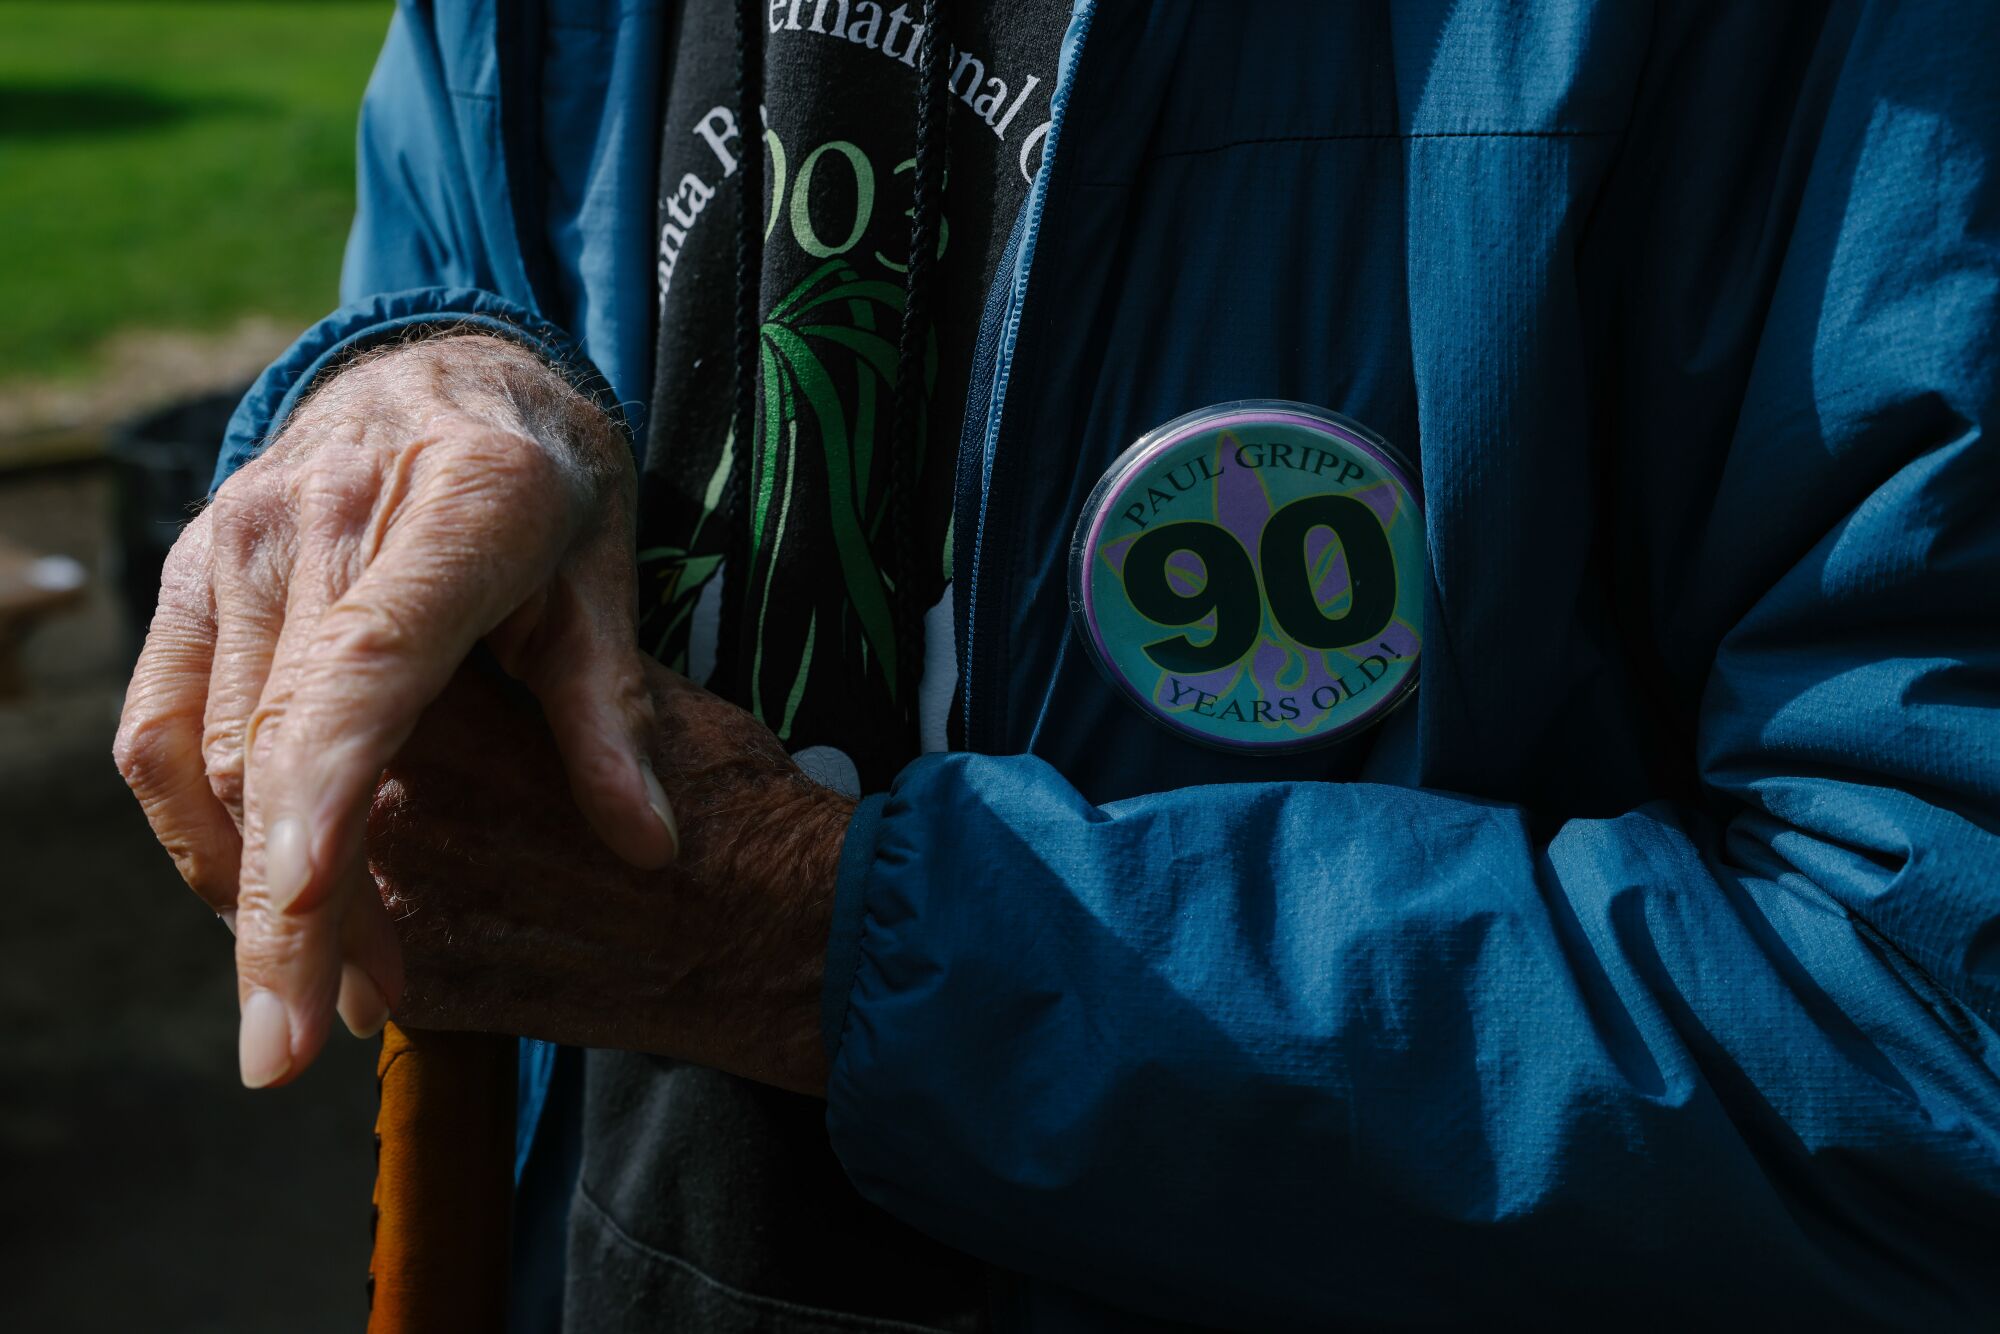 A closeup of a man's hand resting on a cane; his jacket has a button that says 90